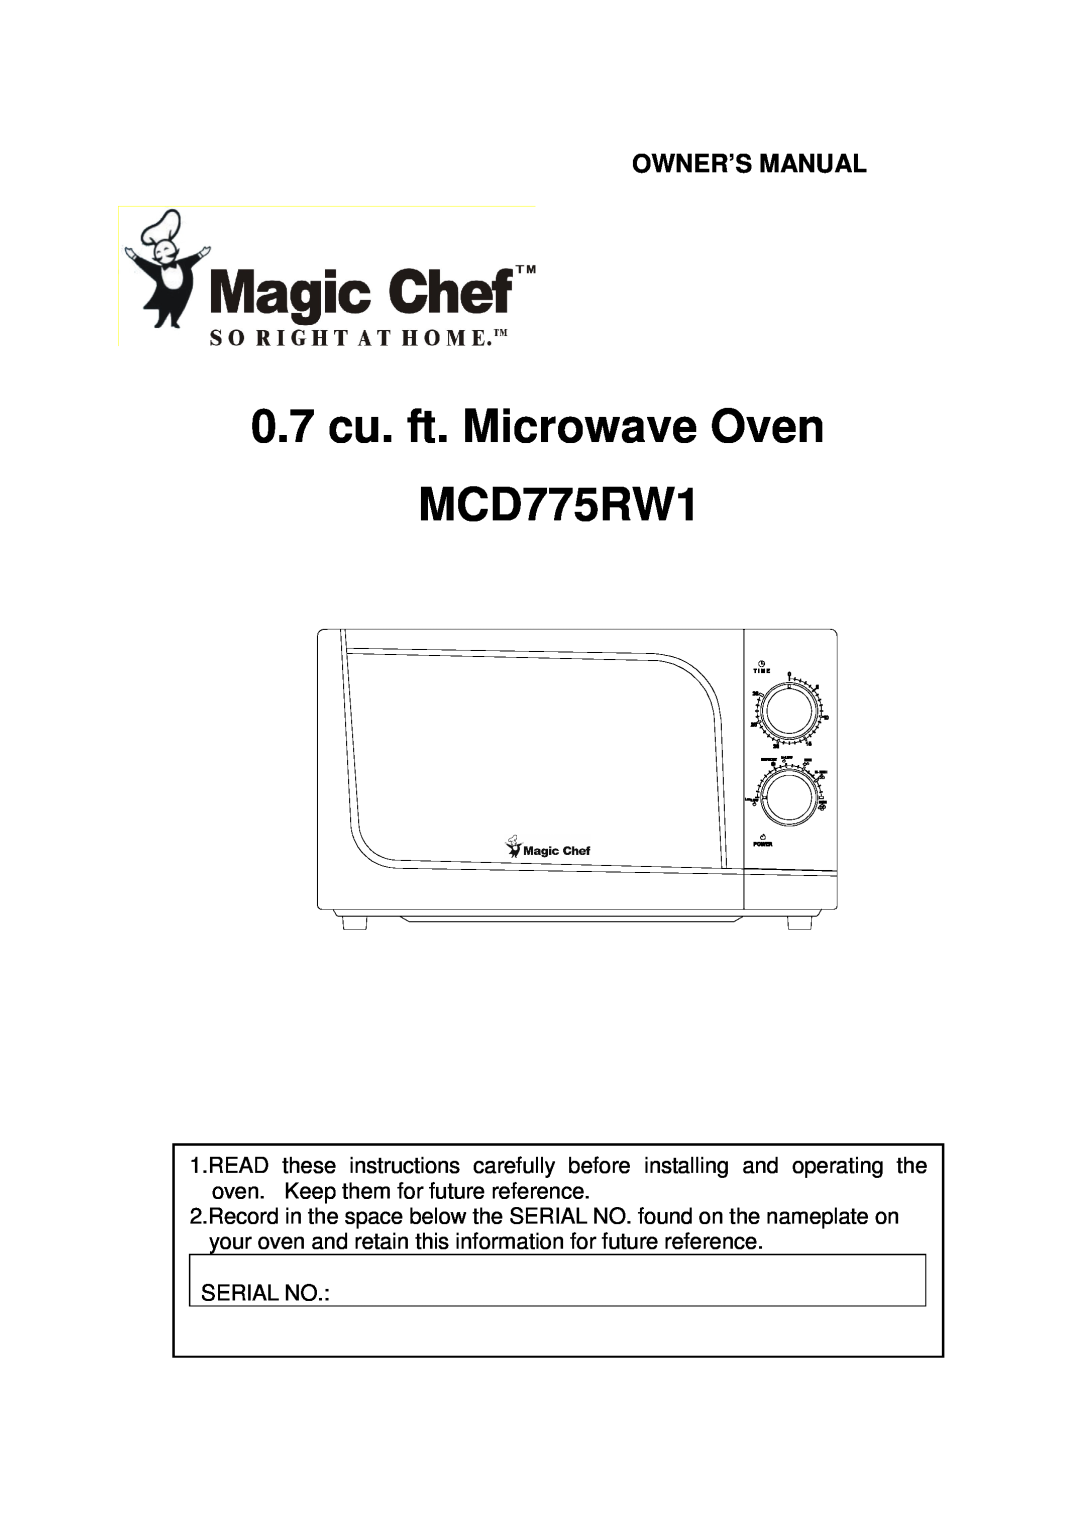 Magic Chef owner manual 0.7cu. ft. Microwave Oven MCD775RW1 